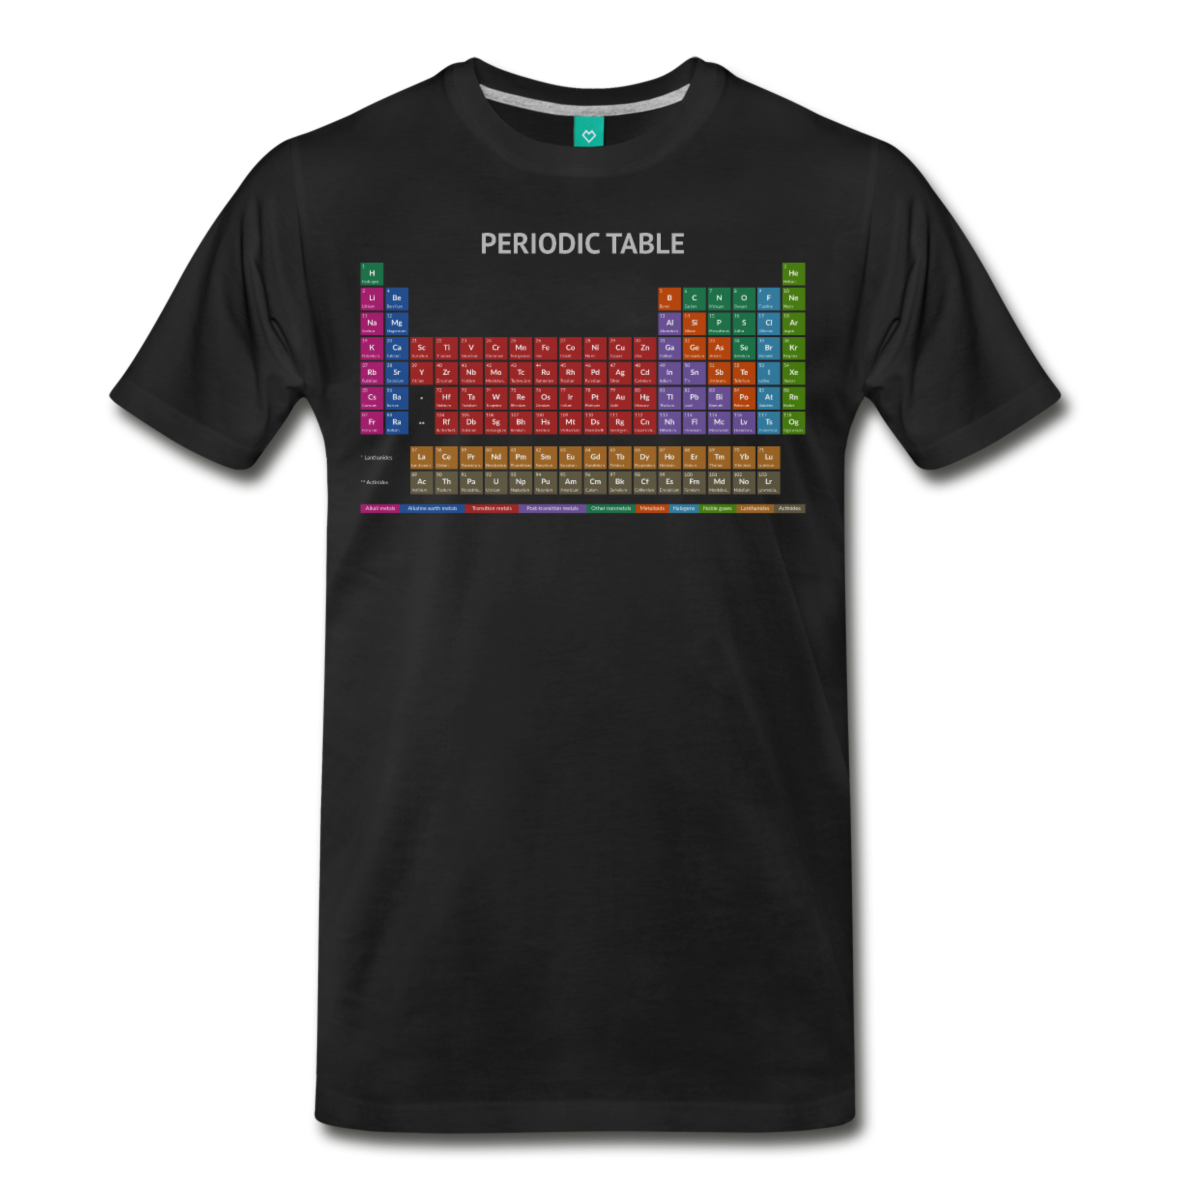 Periodic table t-shirt in dark background